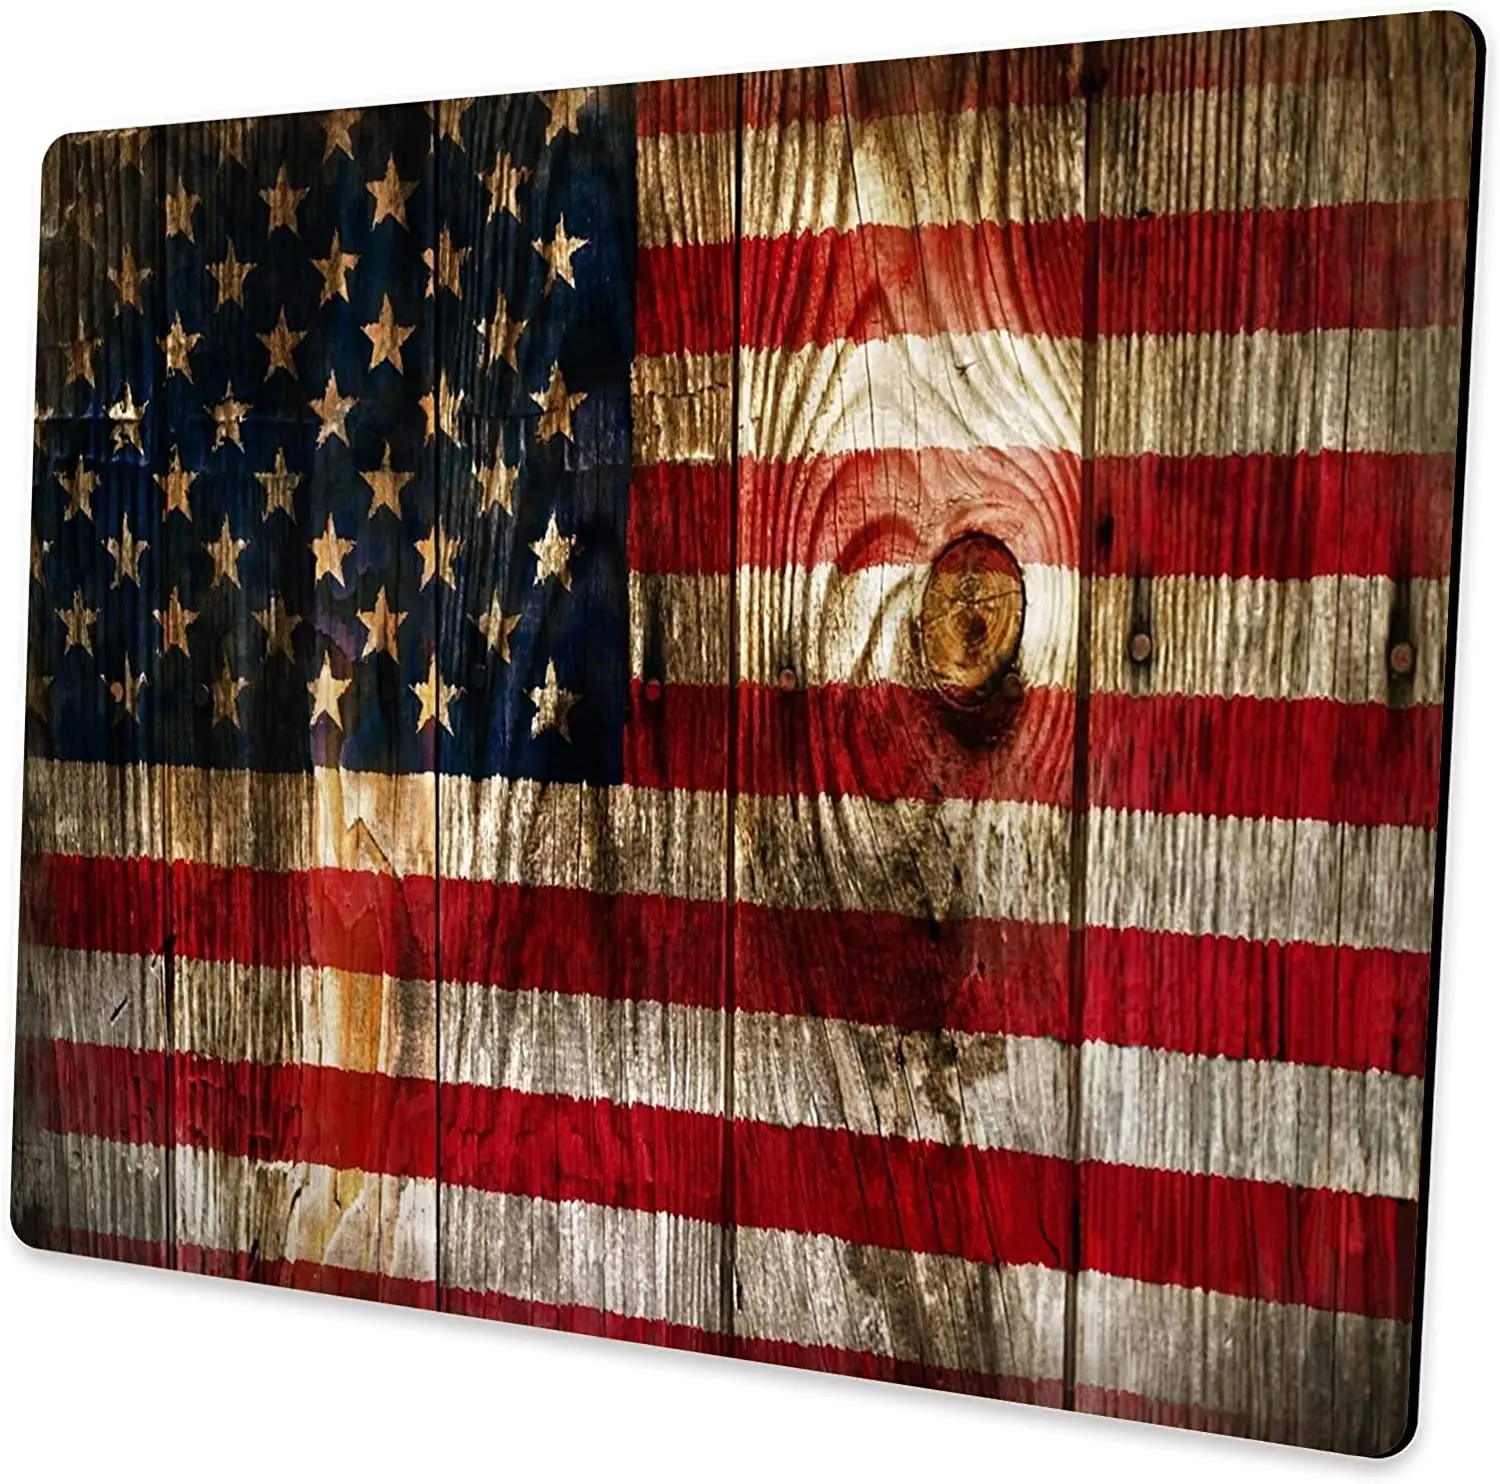 America Flag Mouse Pad Unique Design Anti-Slip Rubber Base Mouse Pad for Desktop Computer and Laptop Mouse Pad 9.5X7.9 Inch